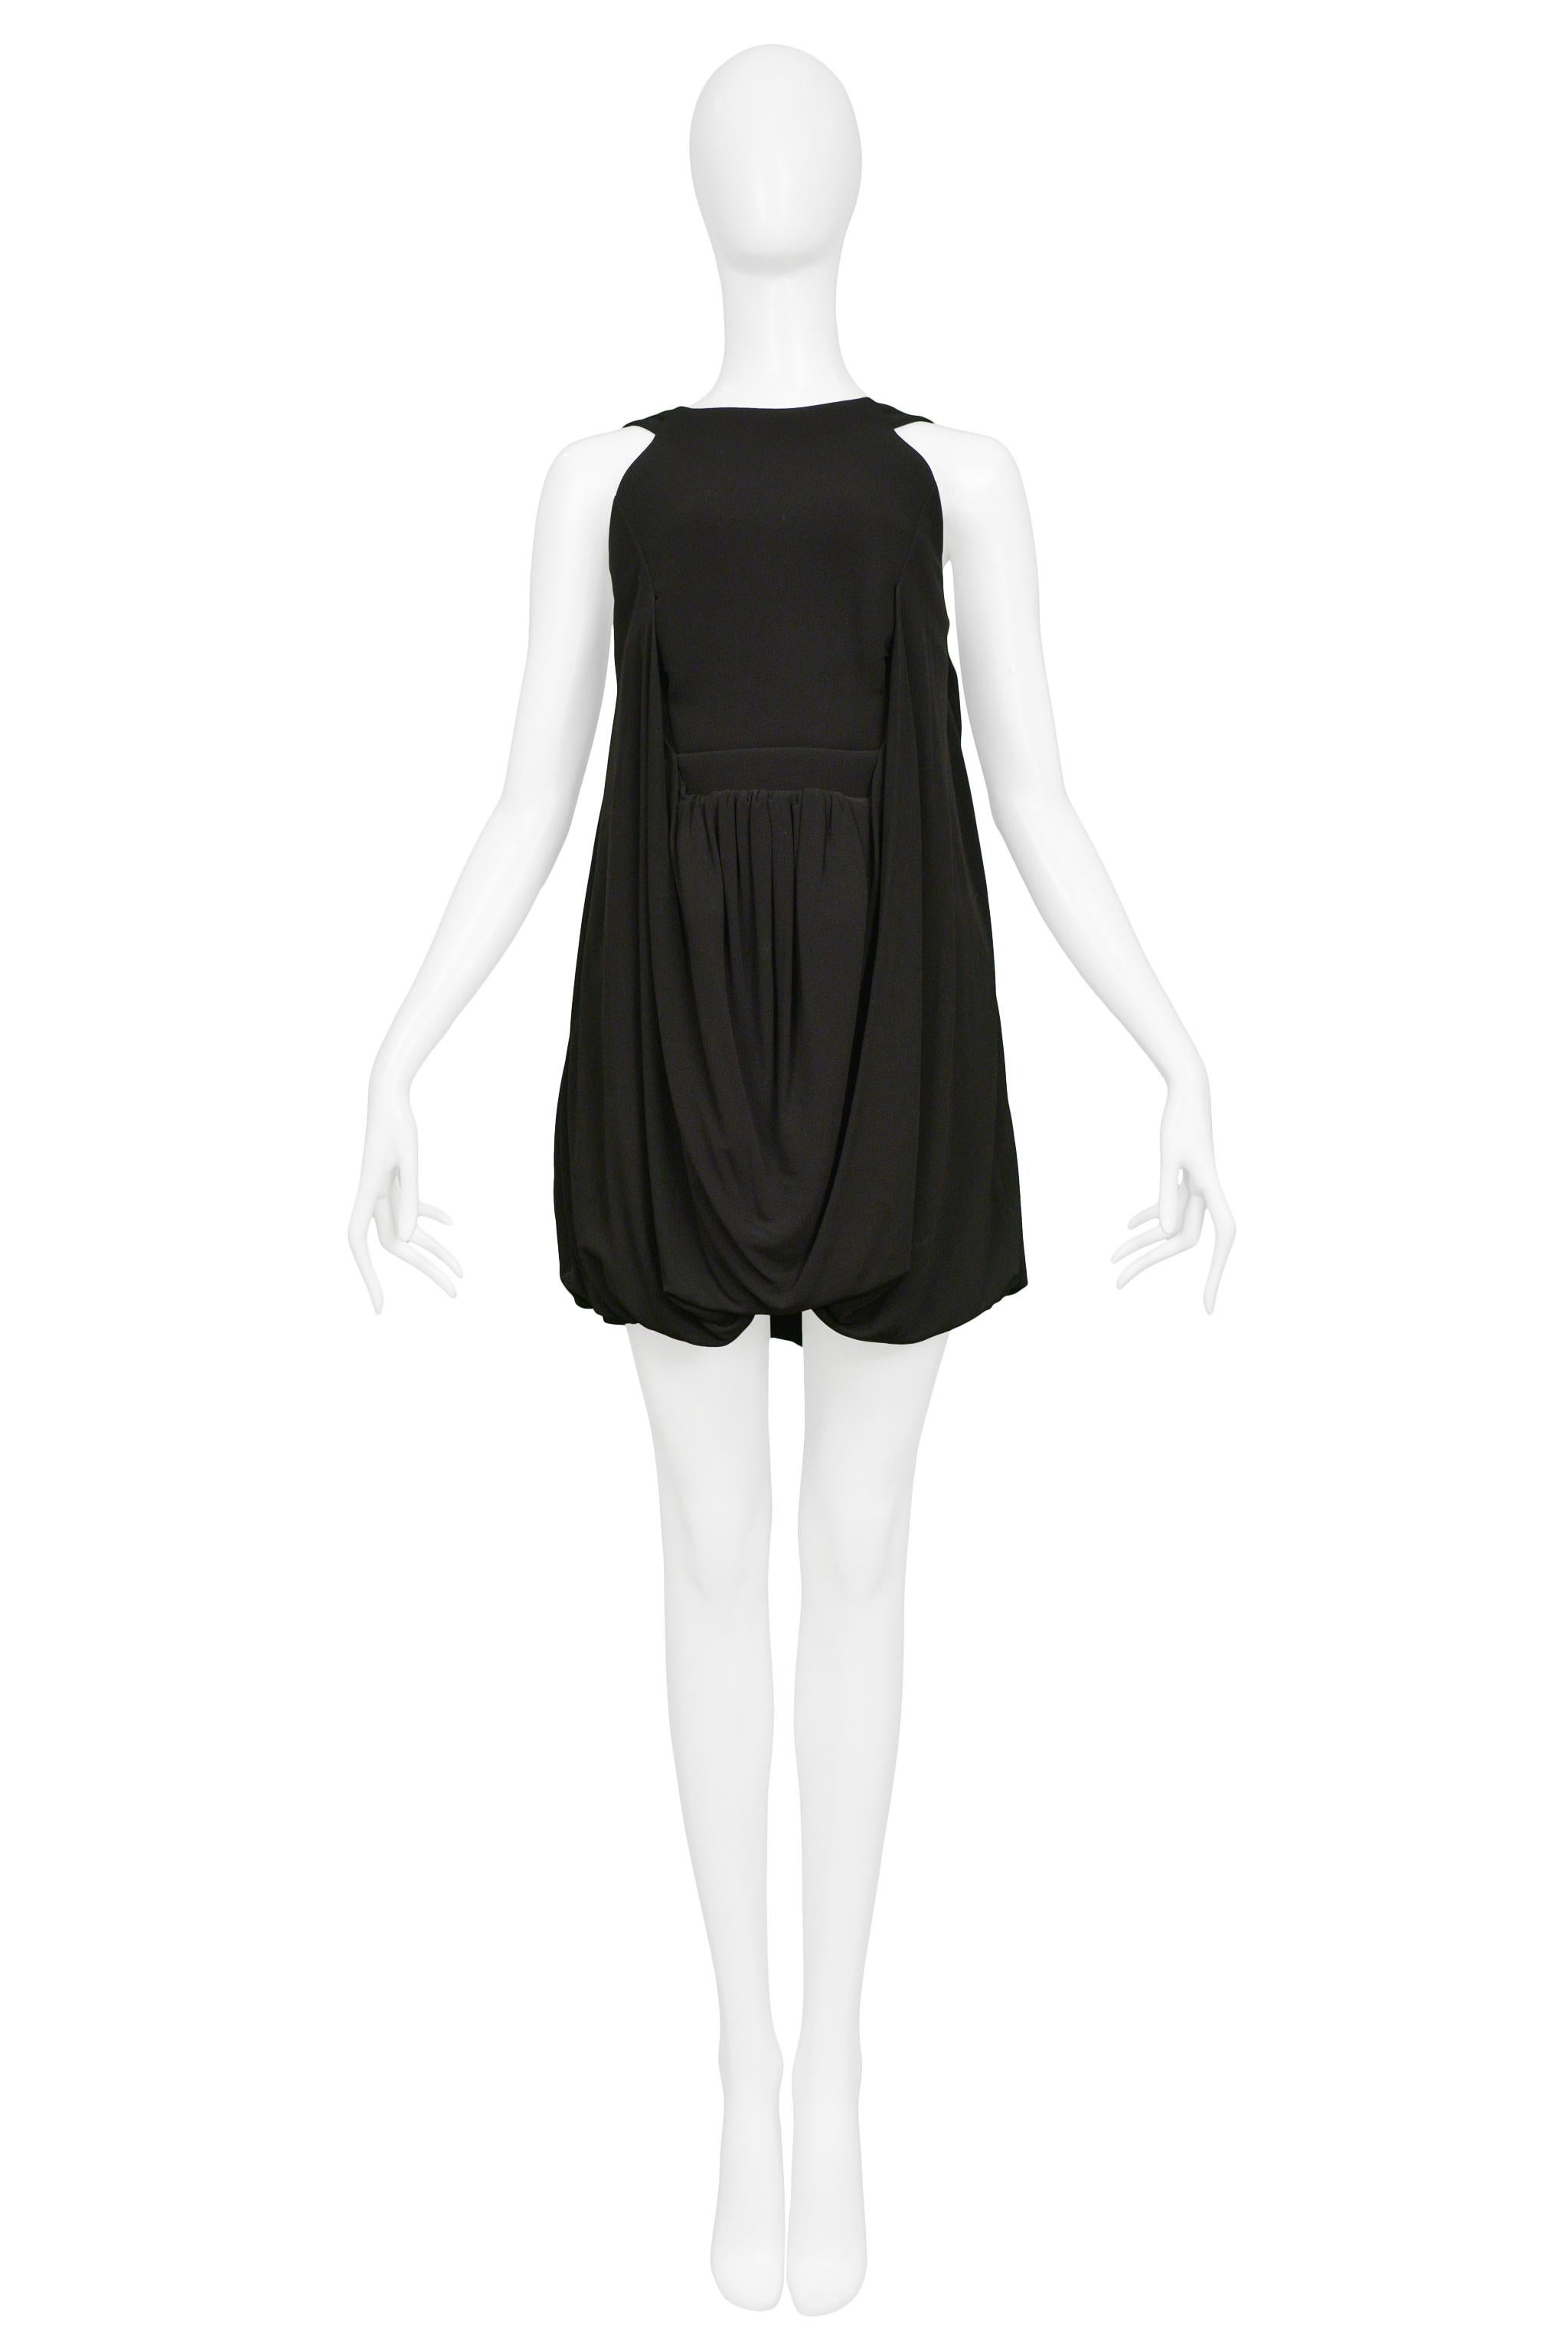 Resurrection Vintage is excited to offer a vintage Balenciaga by Nicolas Ghesquiere black viscose cocktail dress featuring an empire waistline, drape skirt, bubble hem, and side zipper.
Balenciaga Paris
Designed by Nicolas Ghesquiere
Size